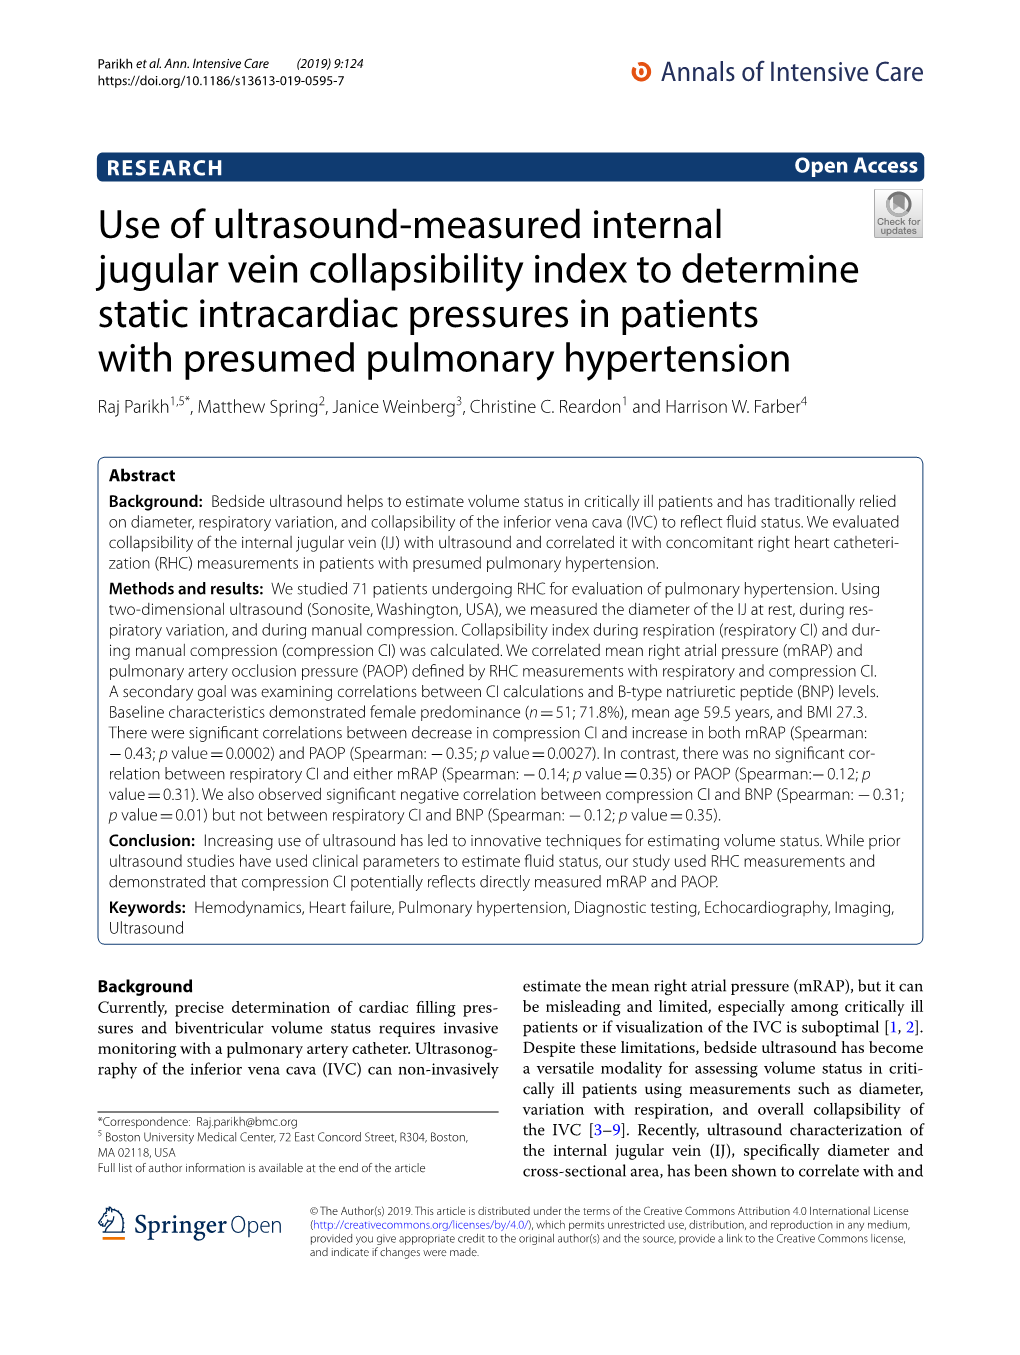 Use of Ultrasound-Measured Internal Jugular Vein Collapsibility Index To